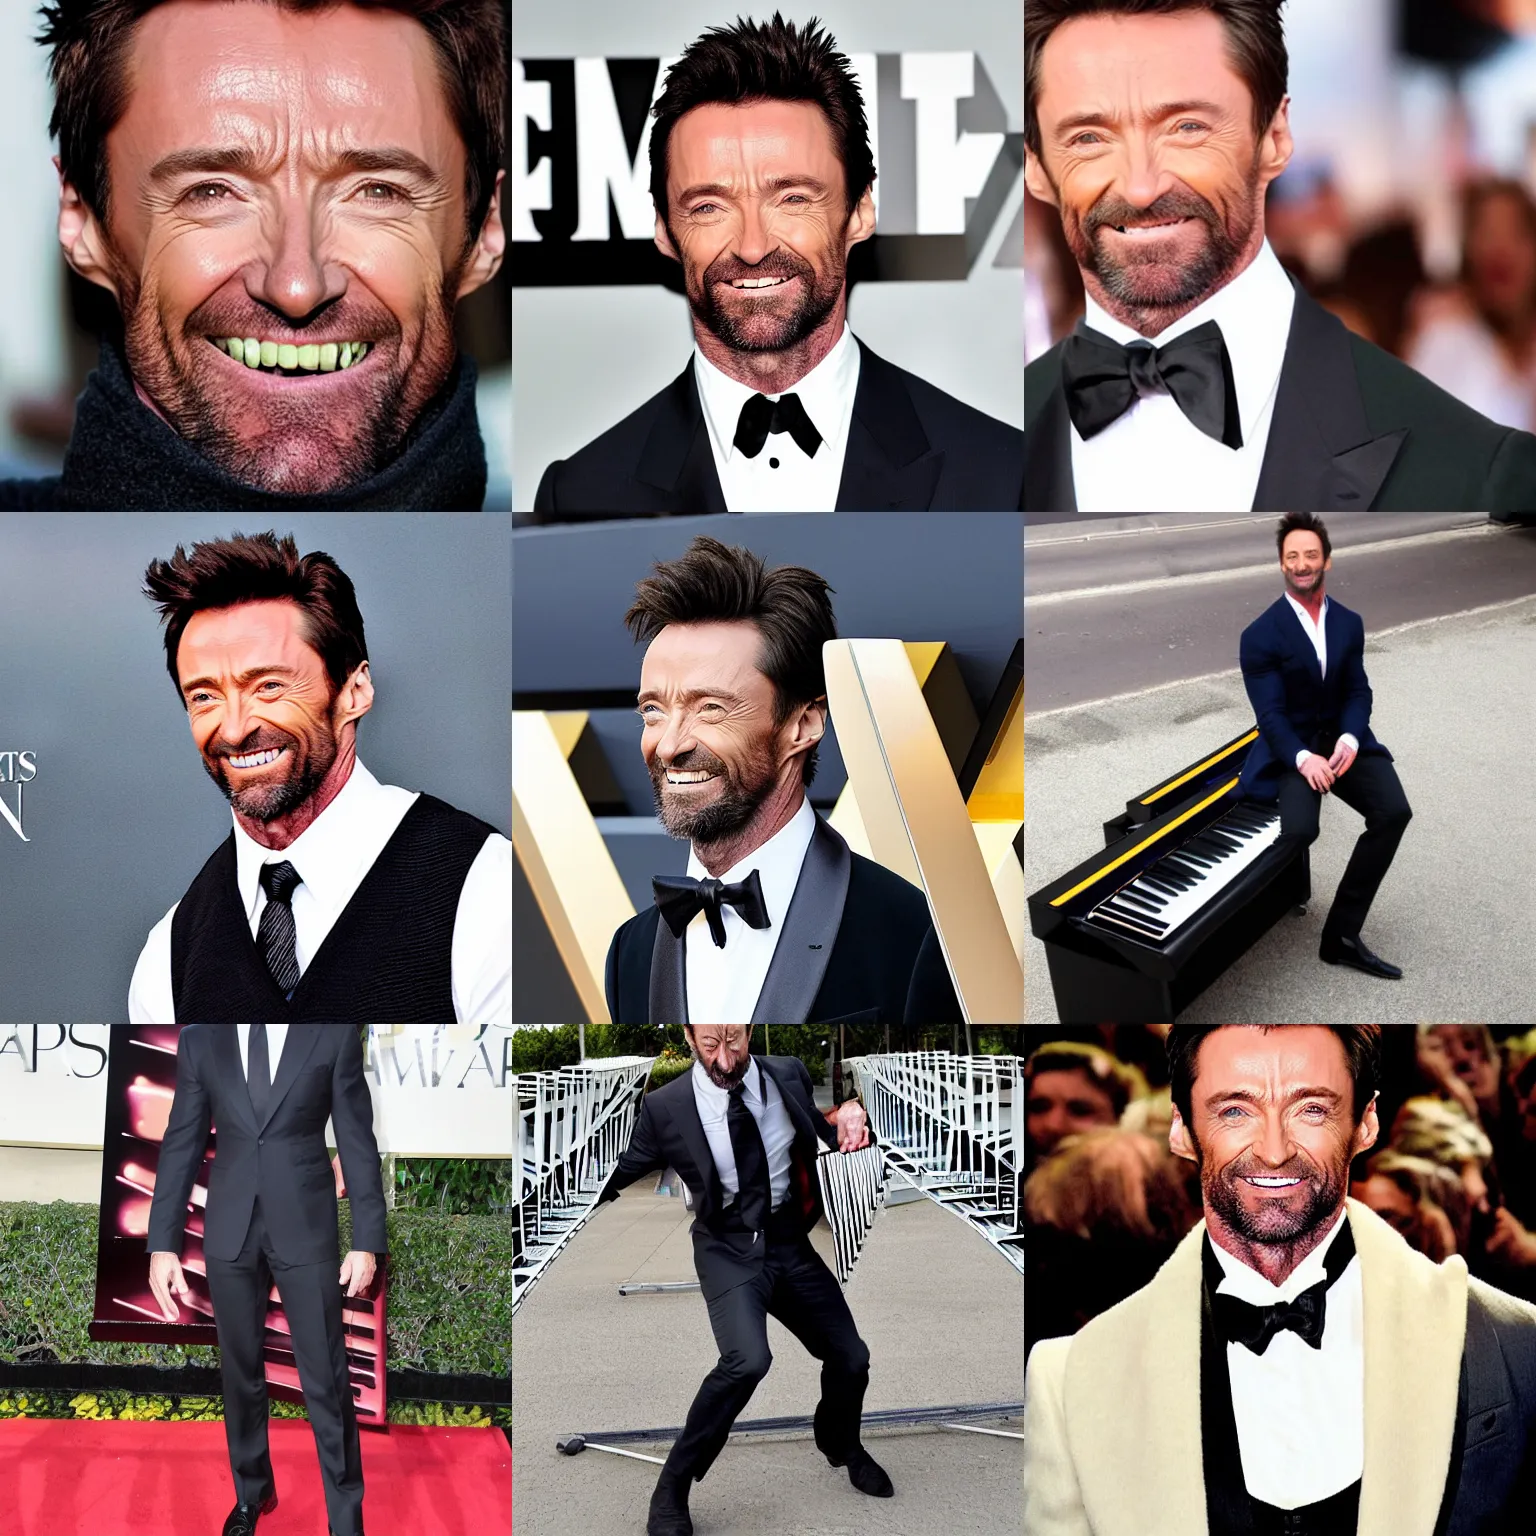 Prompt: hugh jackman with giant piano keys for teeth